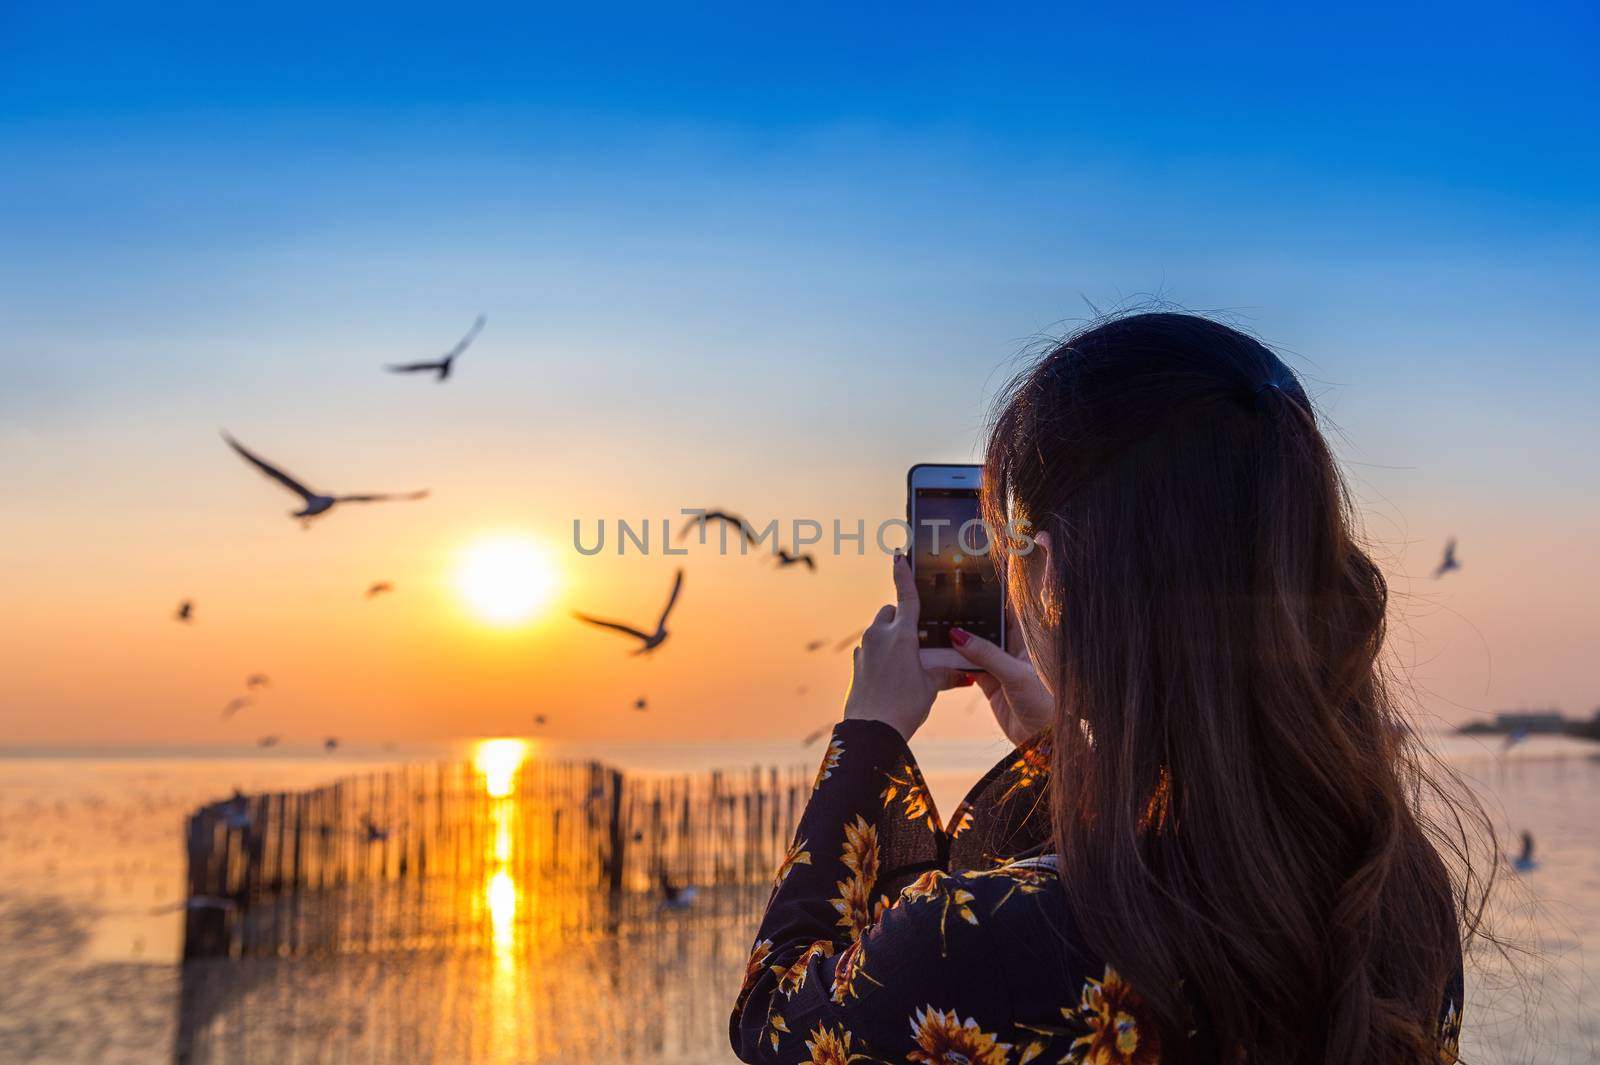 Silhoutte of birds flying and young woman taking a photo at sunset.